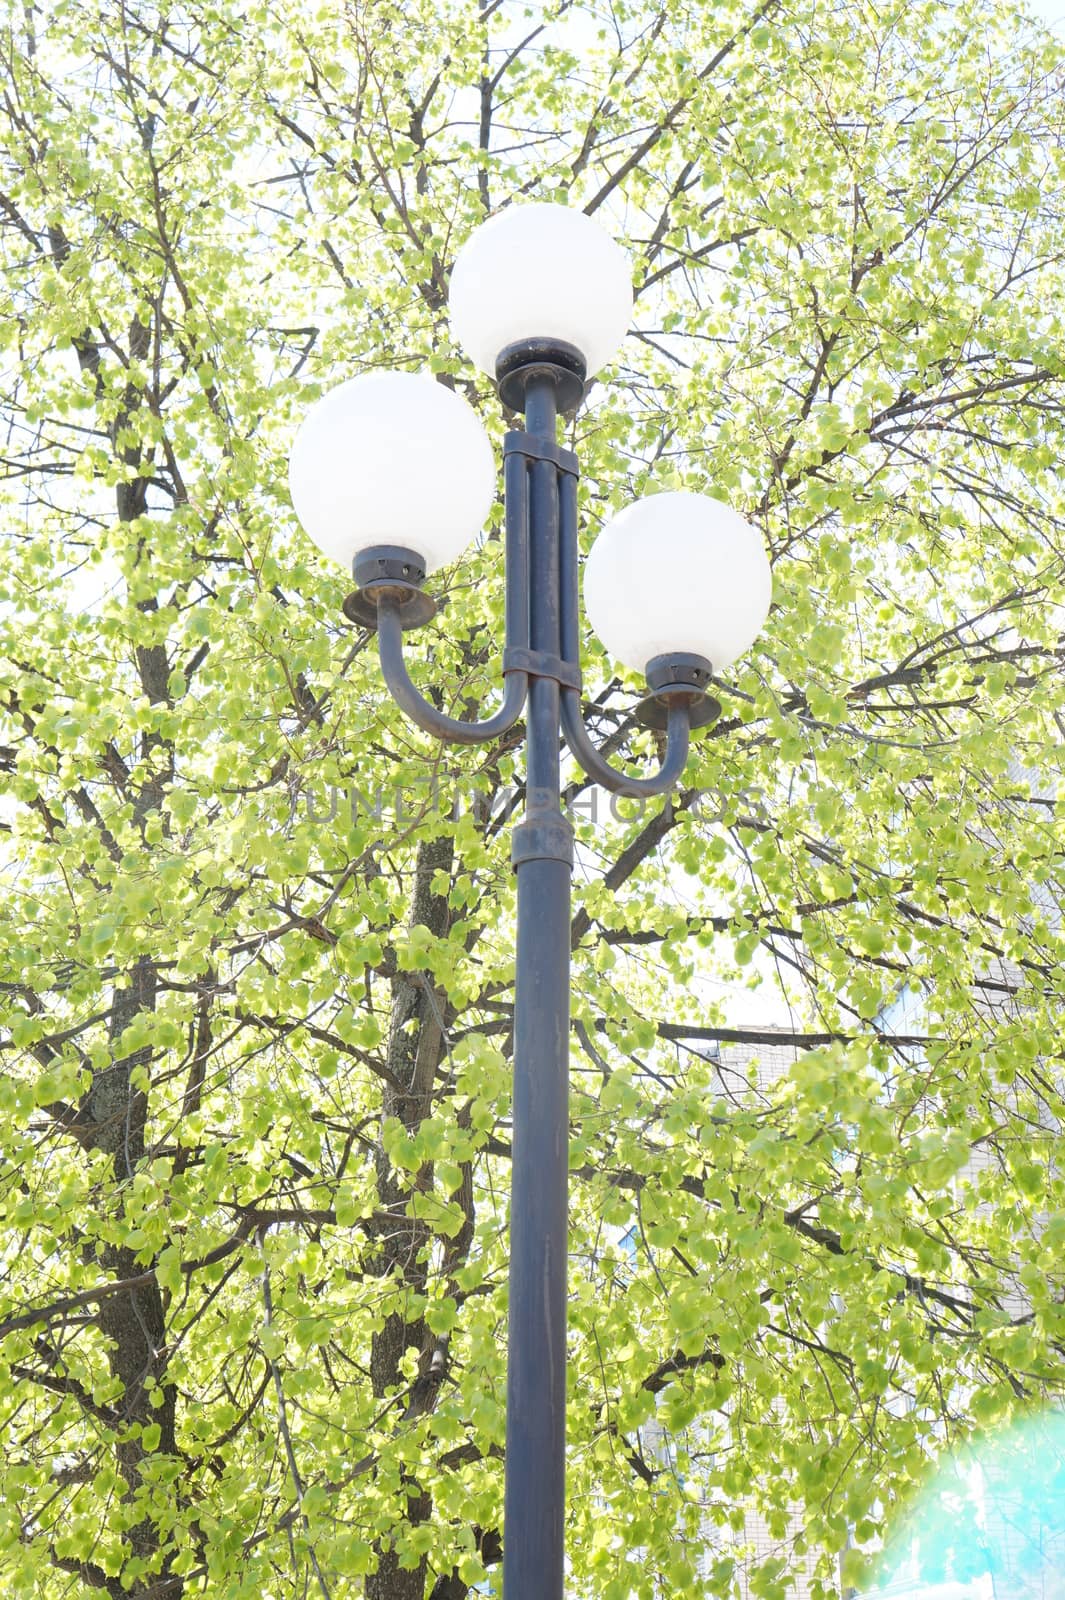 Street lamp in the form of white glass balls on background of green foliage